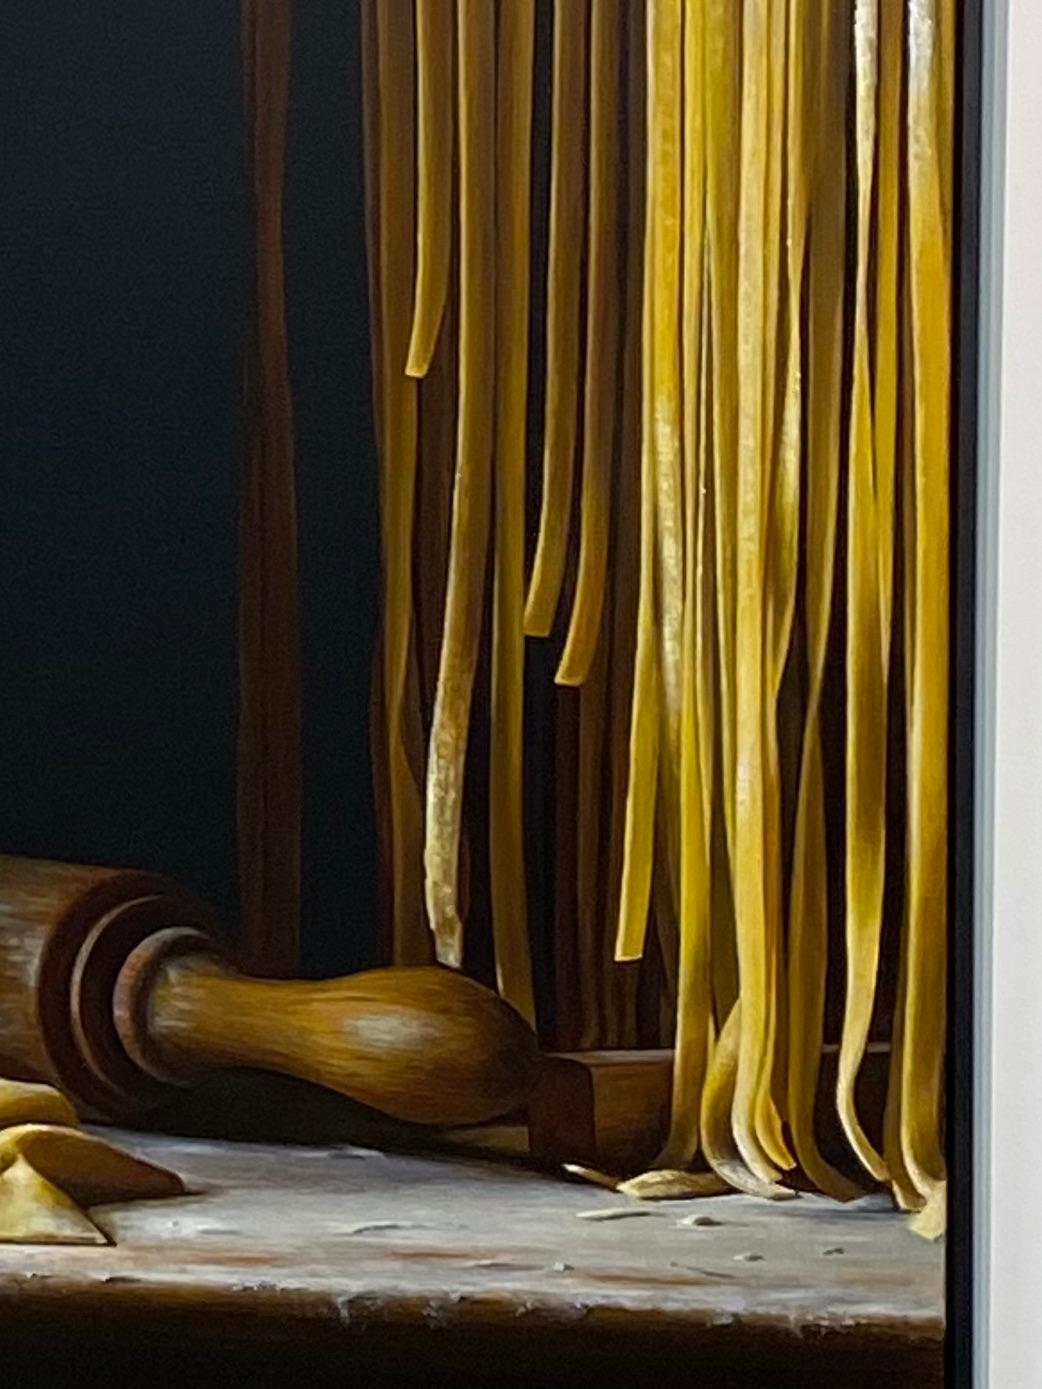 Pasta Drying Rack- 21st Century Contemporary Still-life Painting  - Black Figurative Painting by Heidi von Faber